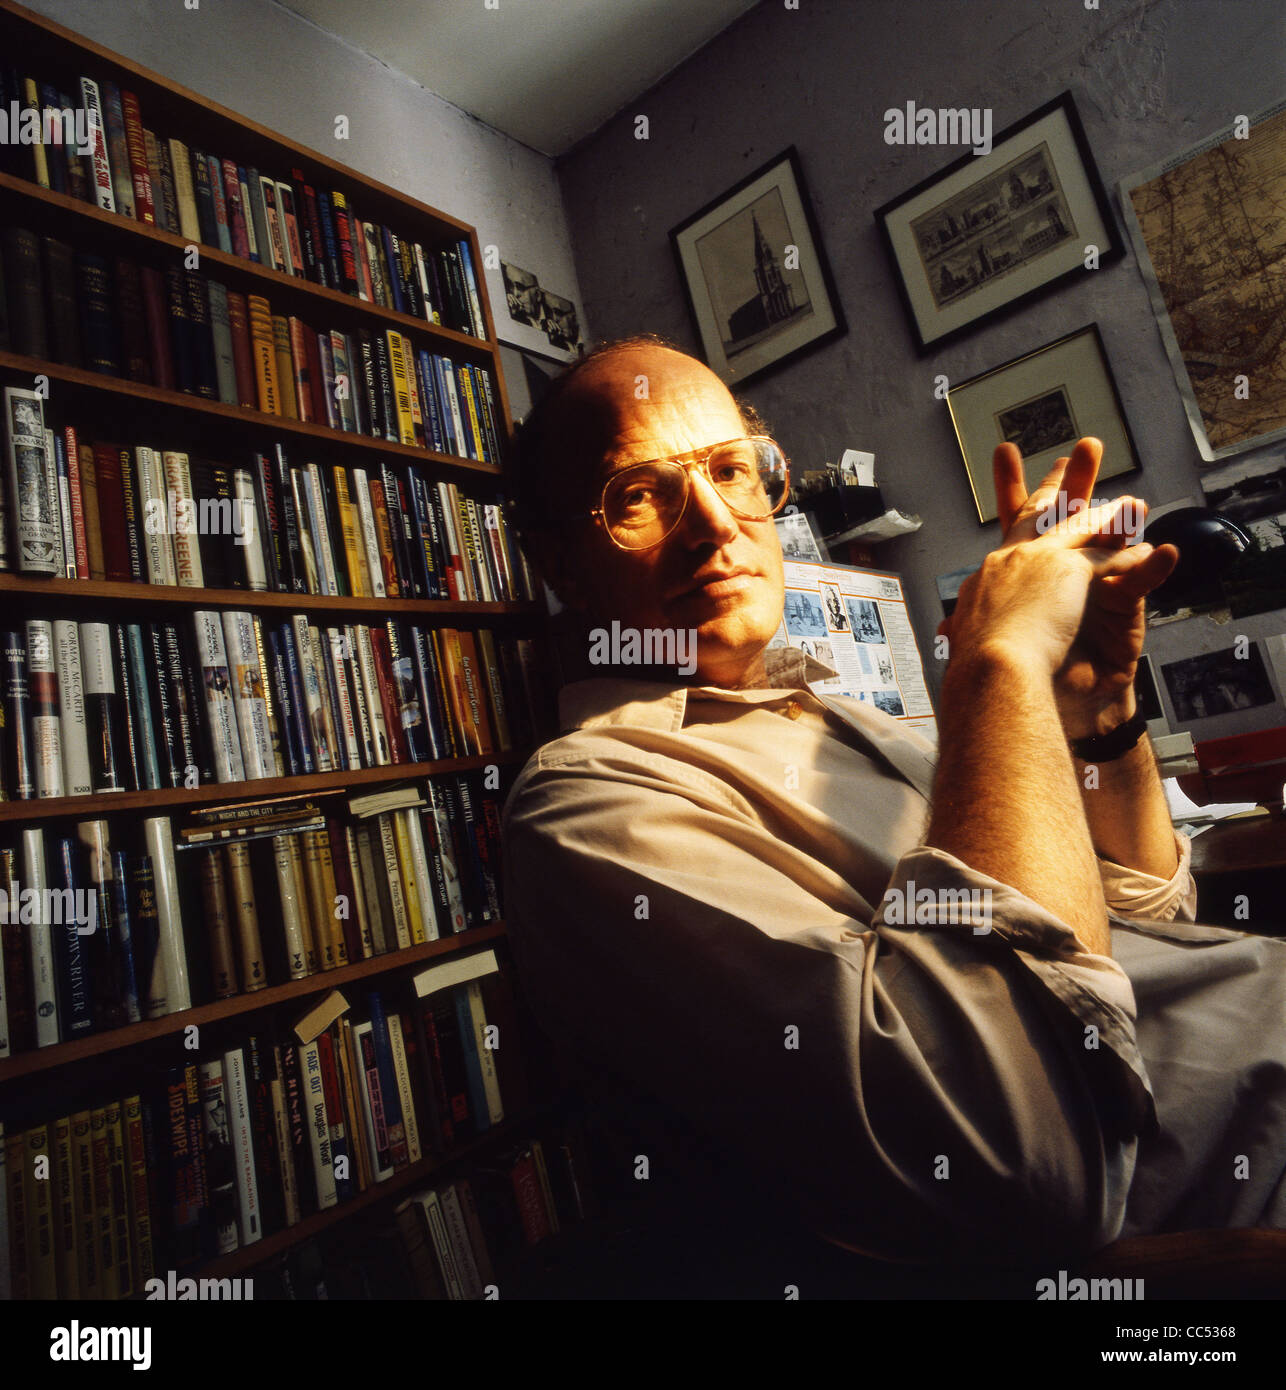 Author Iain Sinclair at his home in Hackney, London, UK Stock Photo